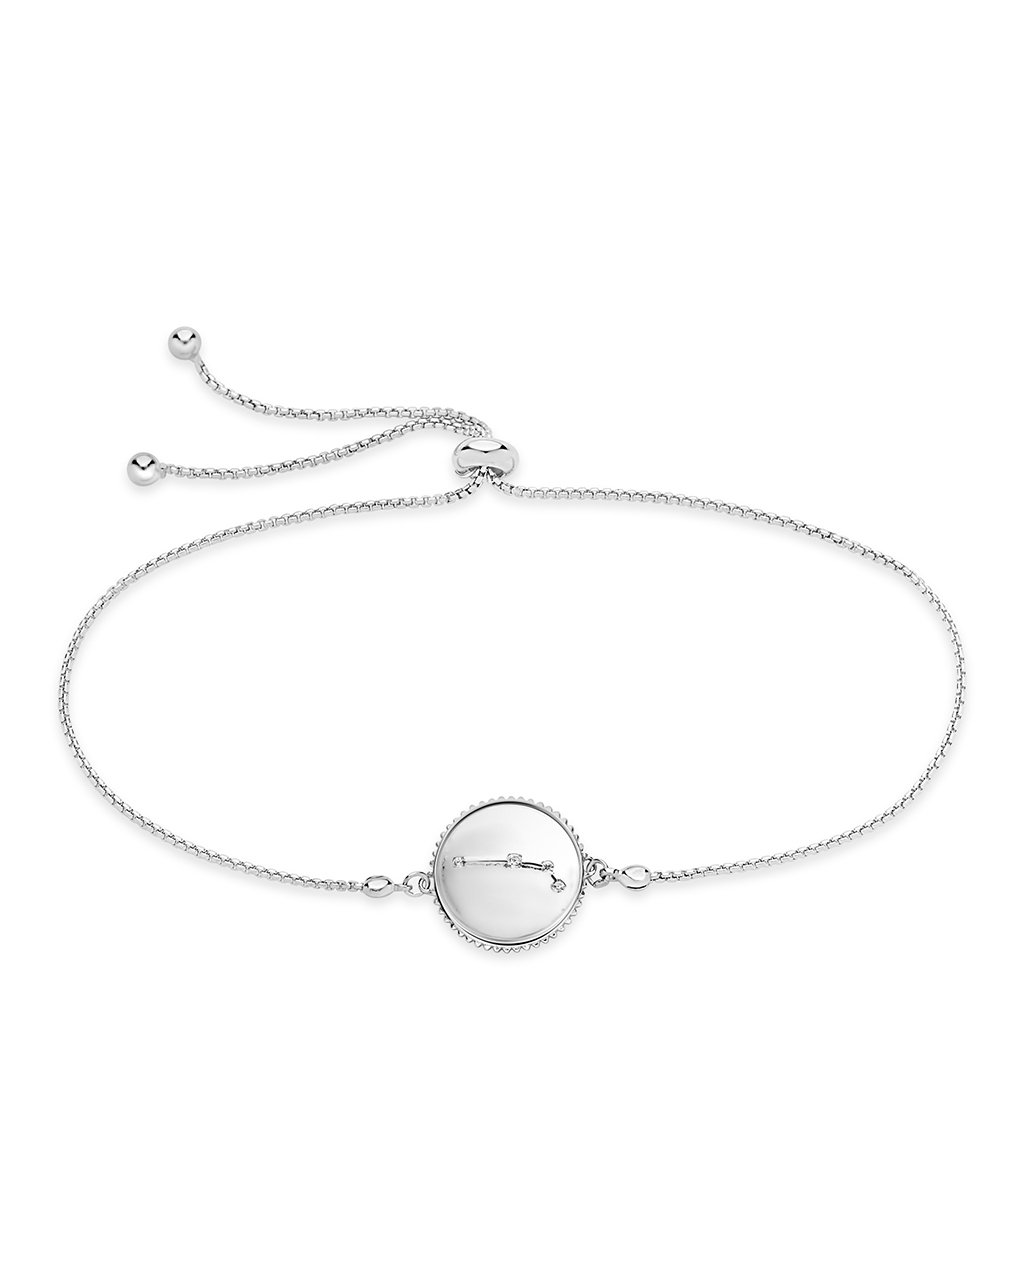 Sterling Silver Constellation Disk Bolo Bracelet Bracelet Sterling Forever Silver Aries (Mar 21 - Apr 19) 